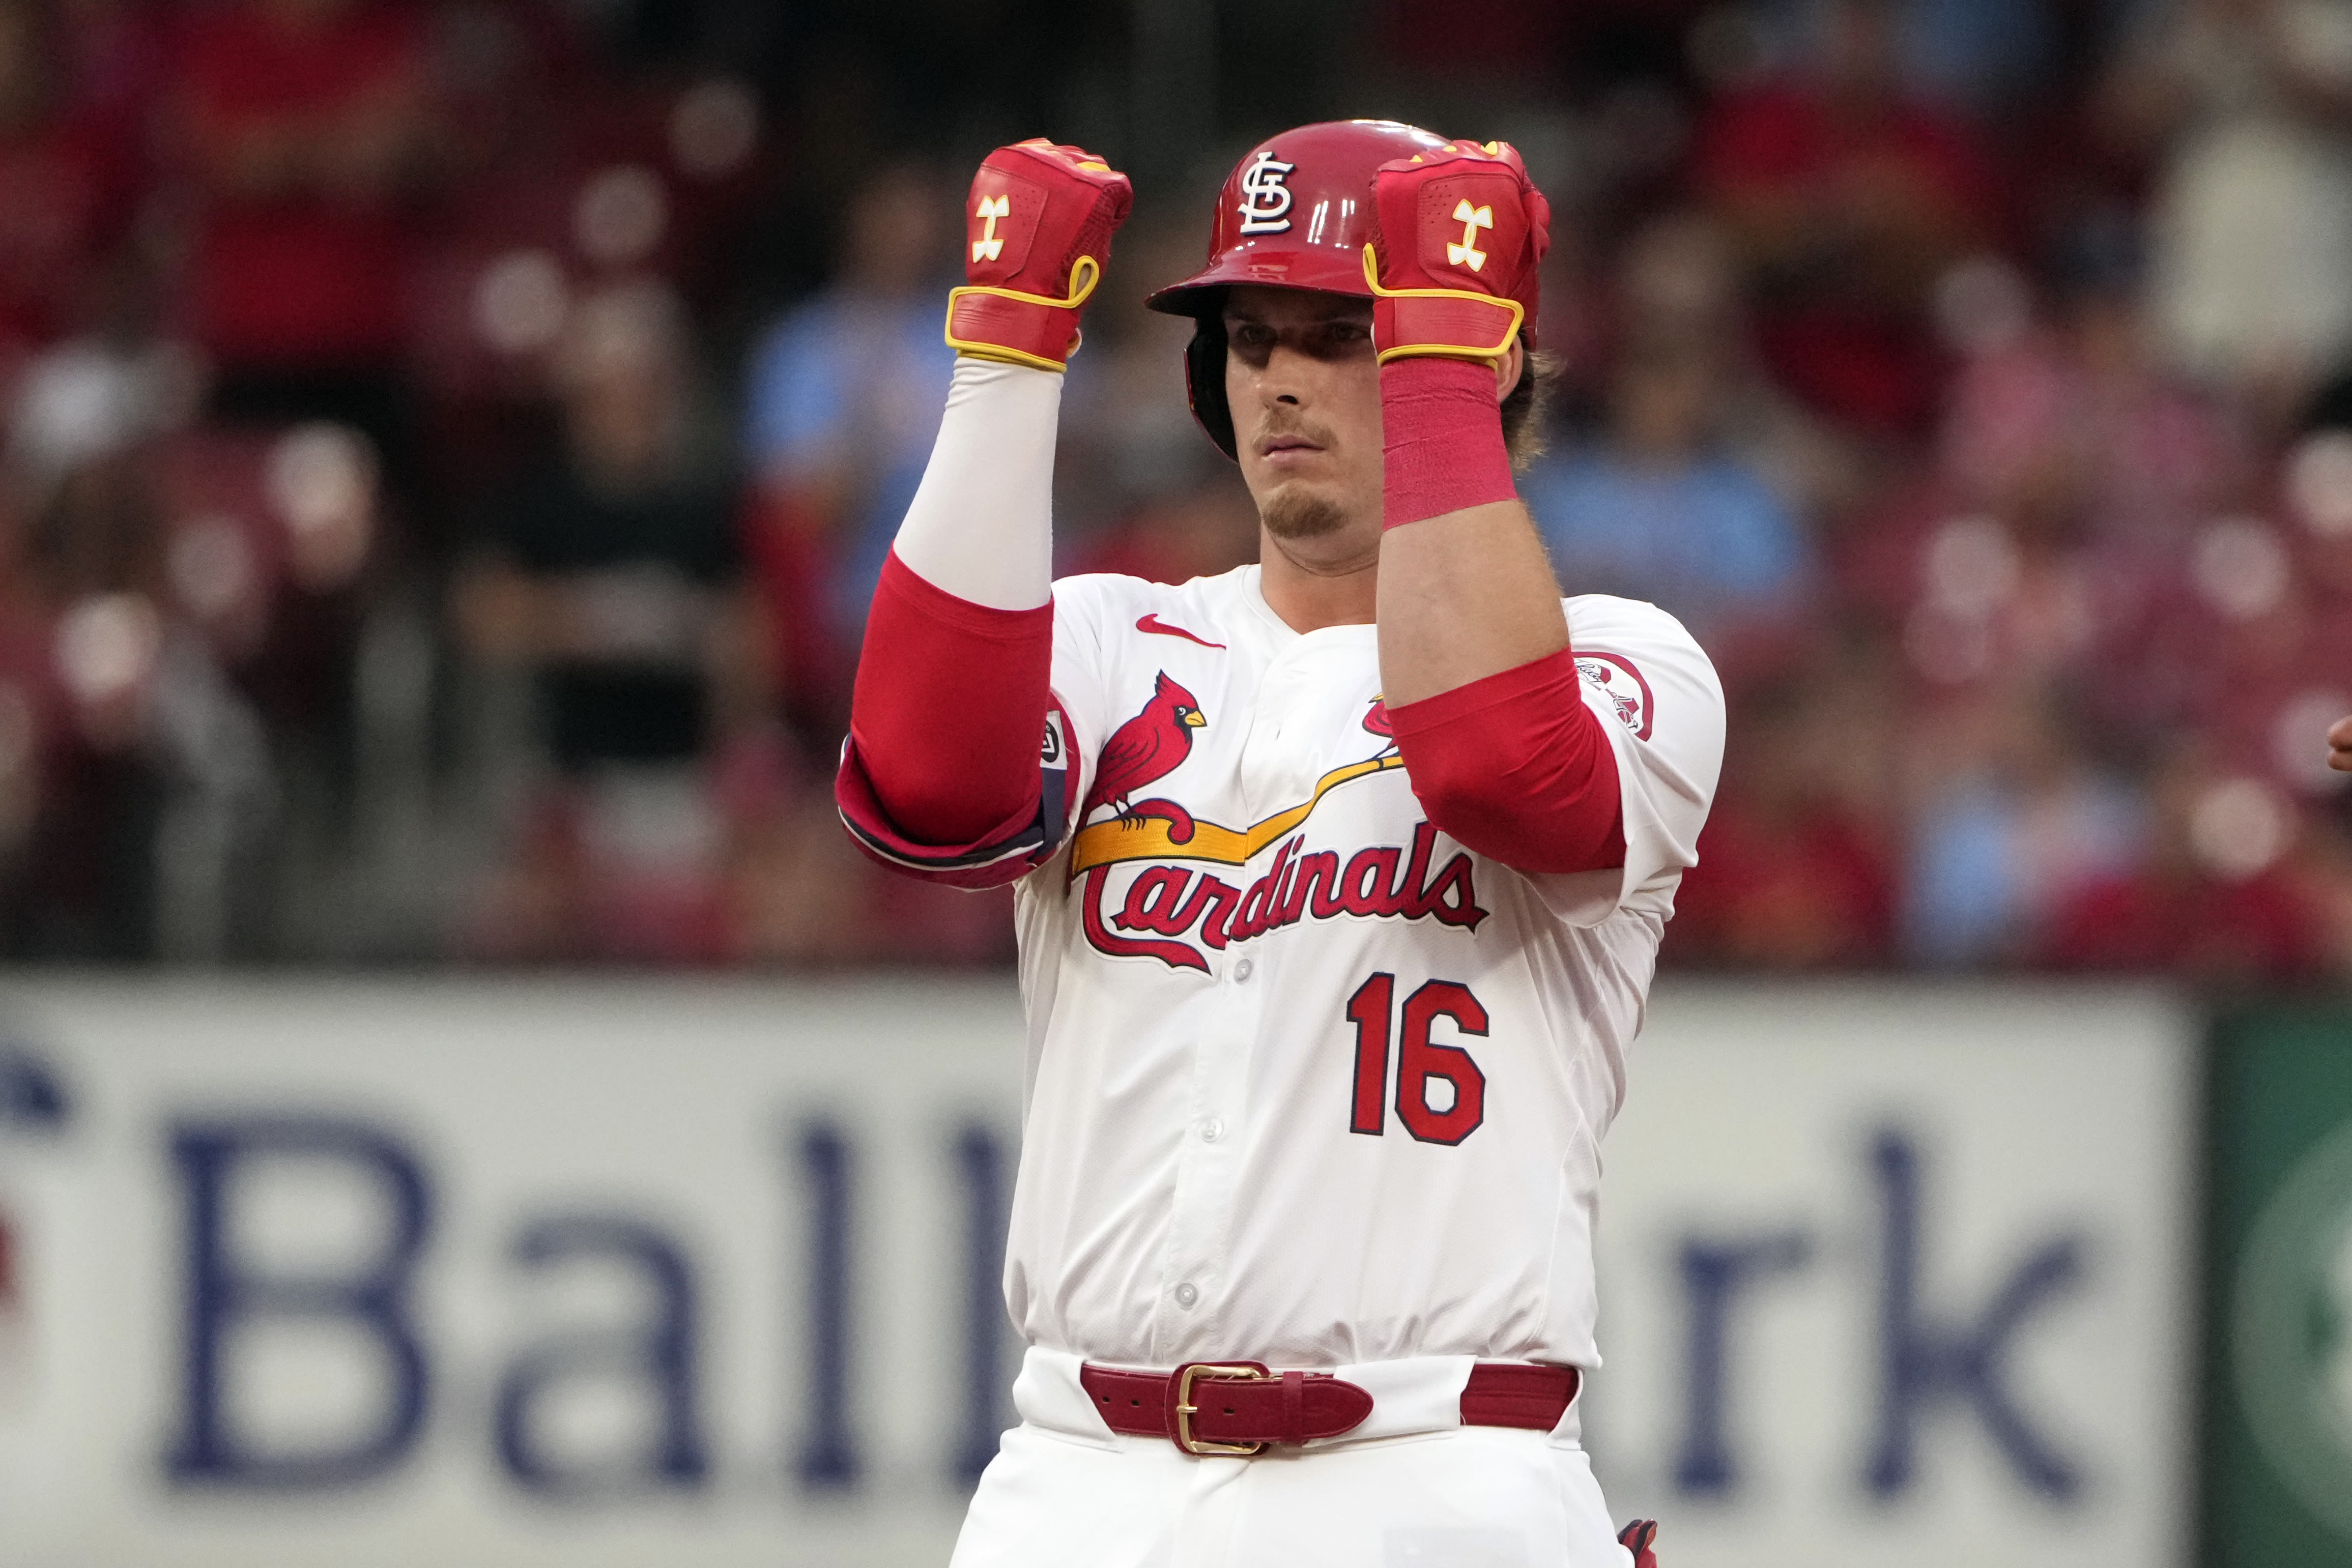 Nolan Gorman homers to help Cardinals beat Orioles 3-1 in game suspended overnight by rain